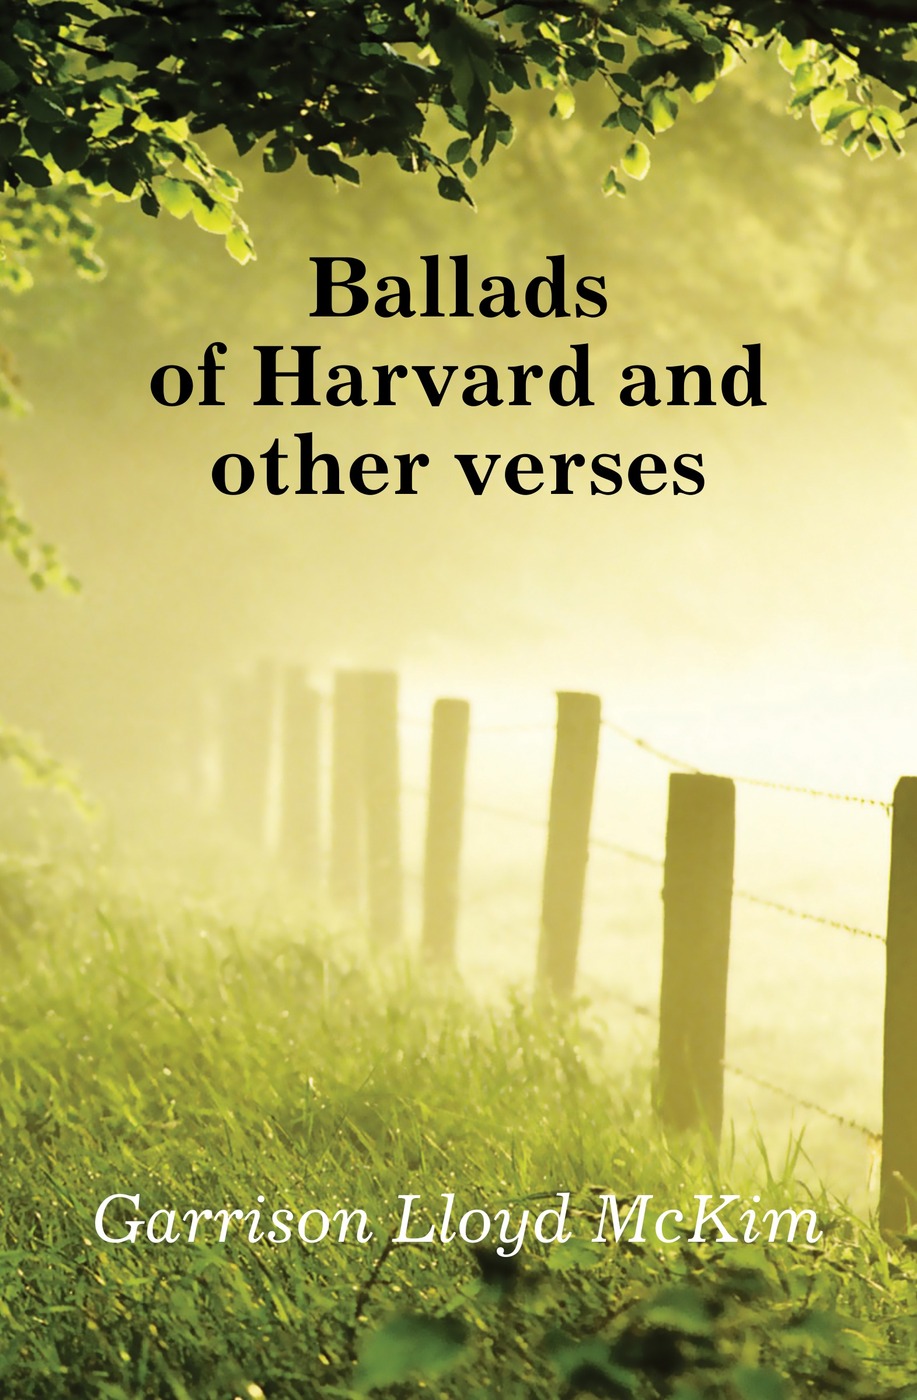 Ballads of Harvard and other verses